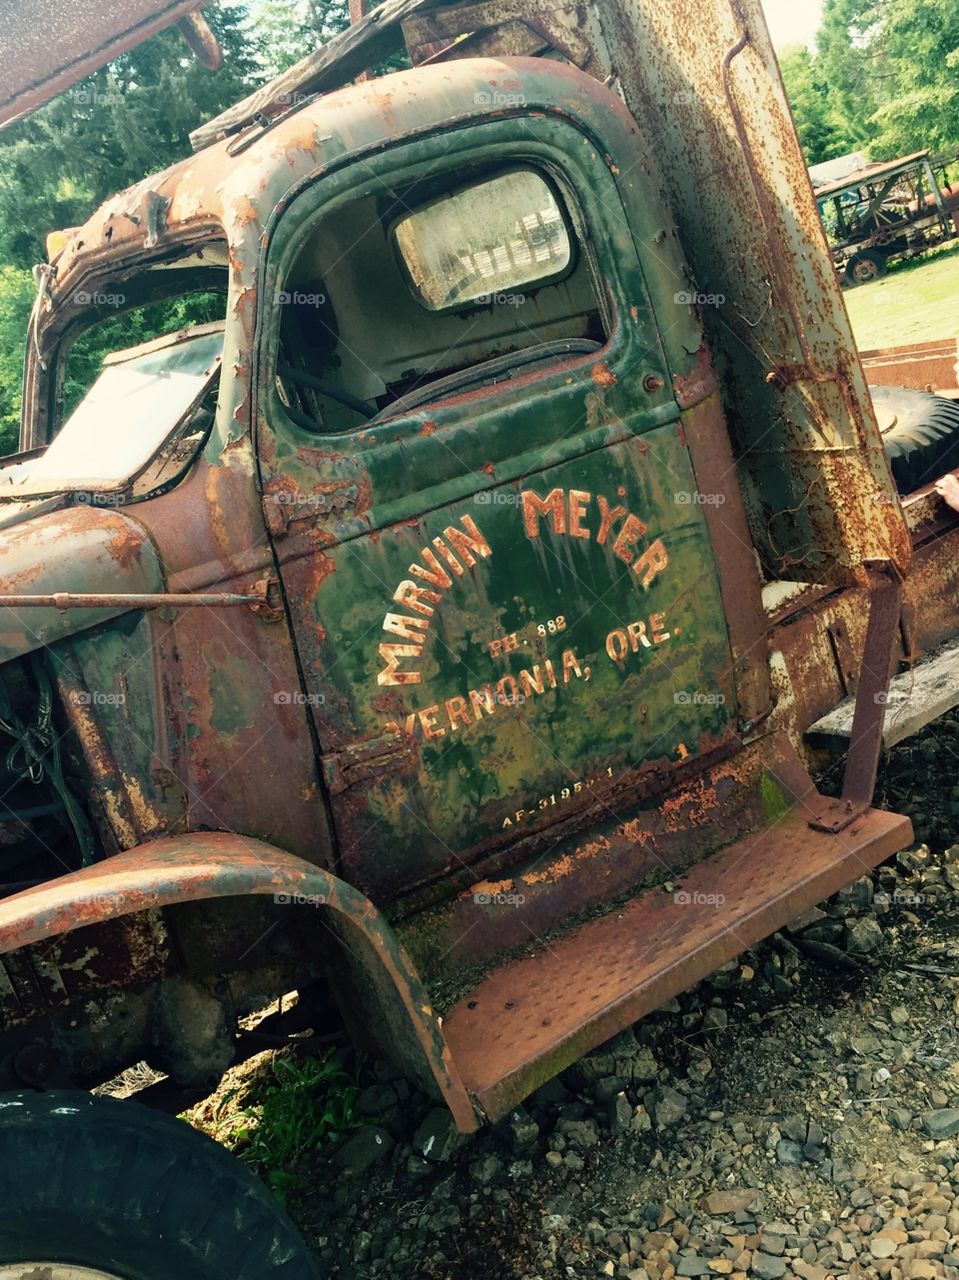 This old truck